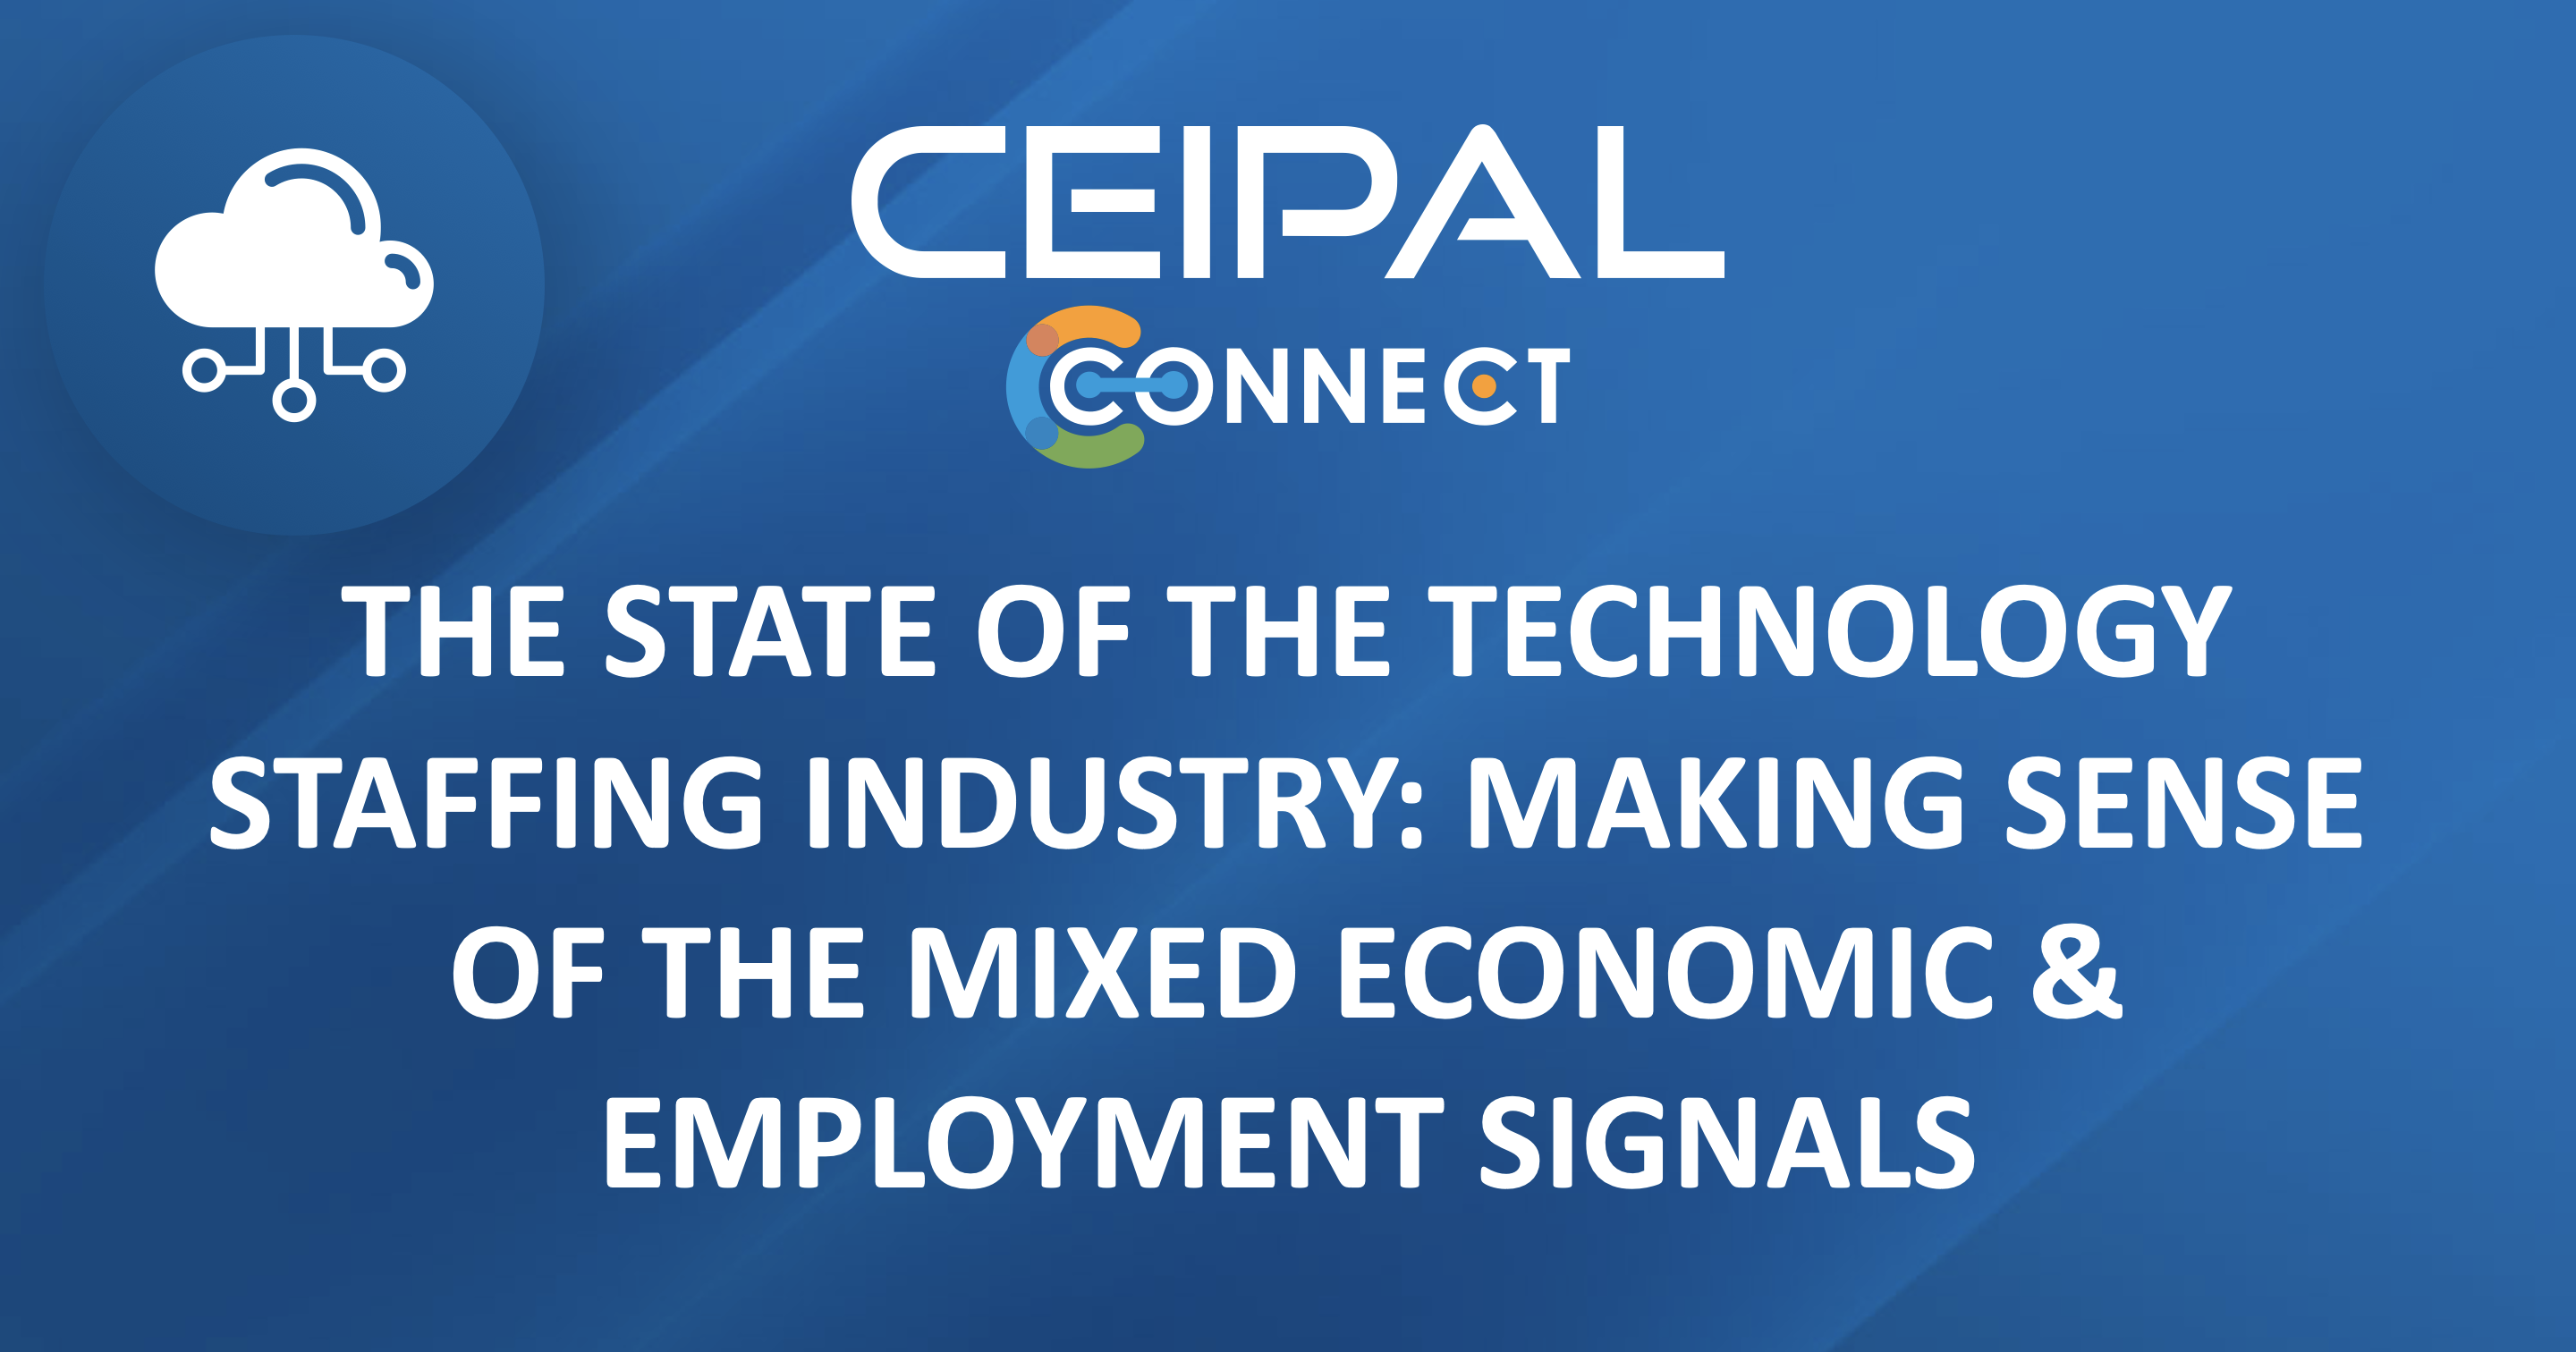 The State of the Technology Staffing Industry: Making Sense of the Mixed Economic & Employment Signals